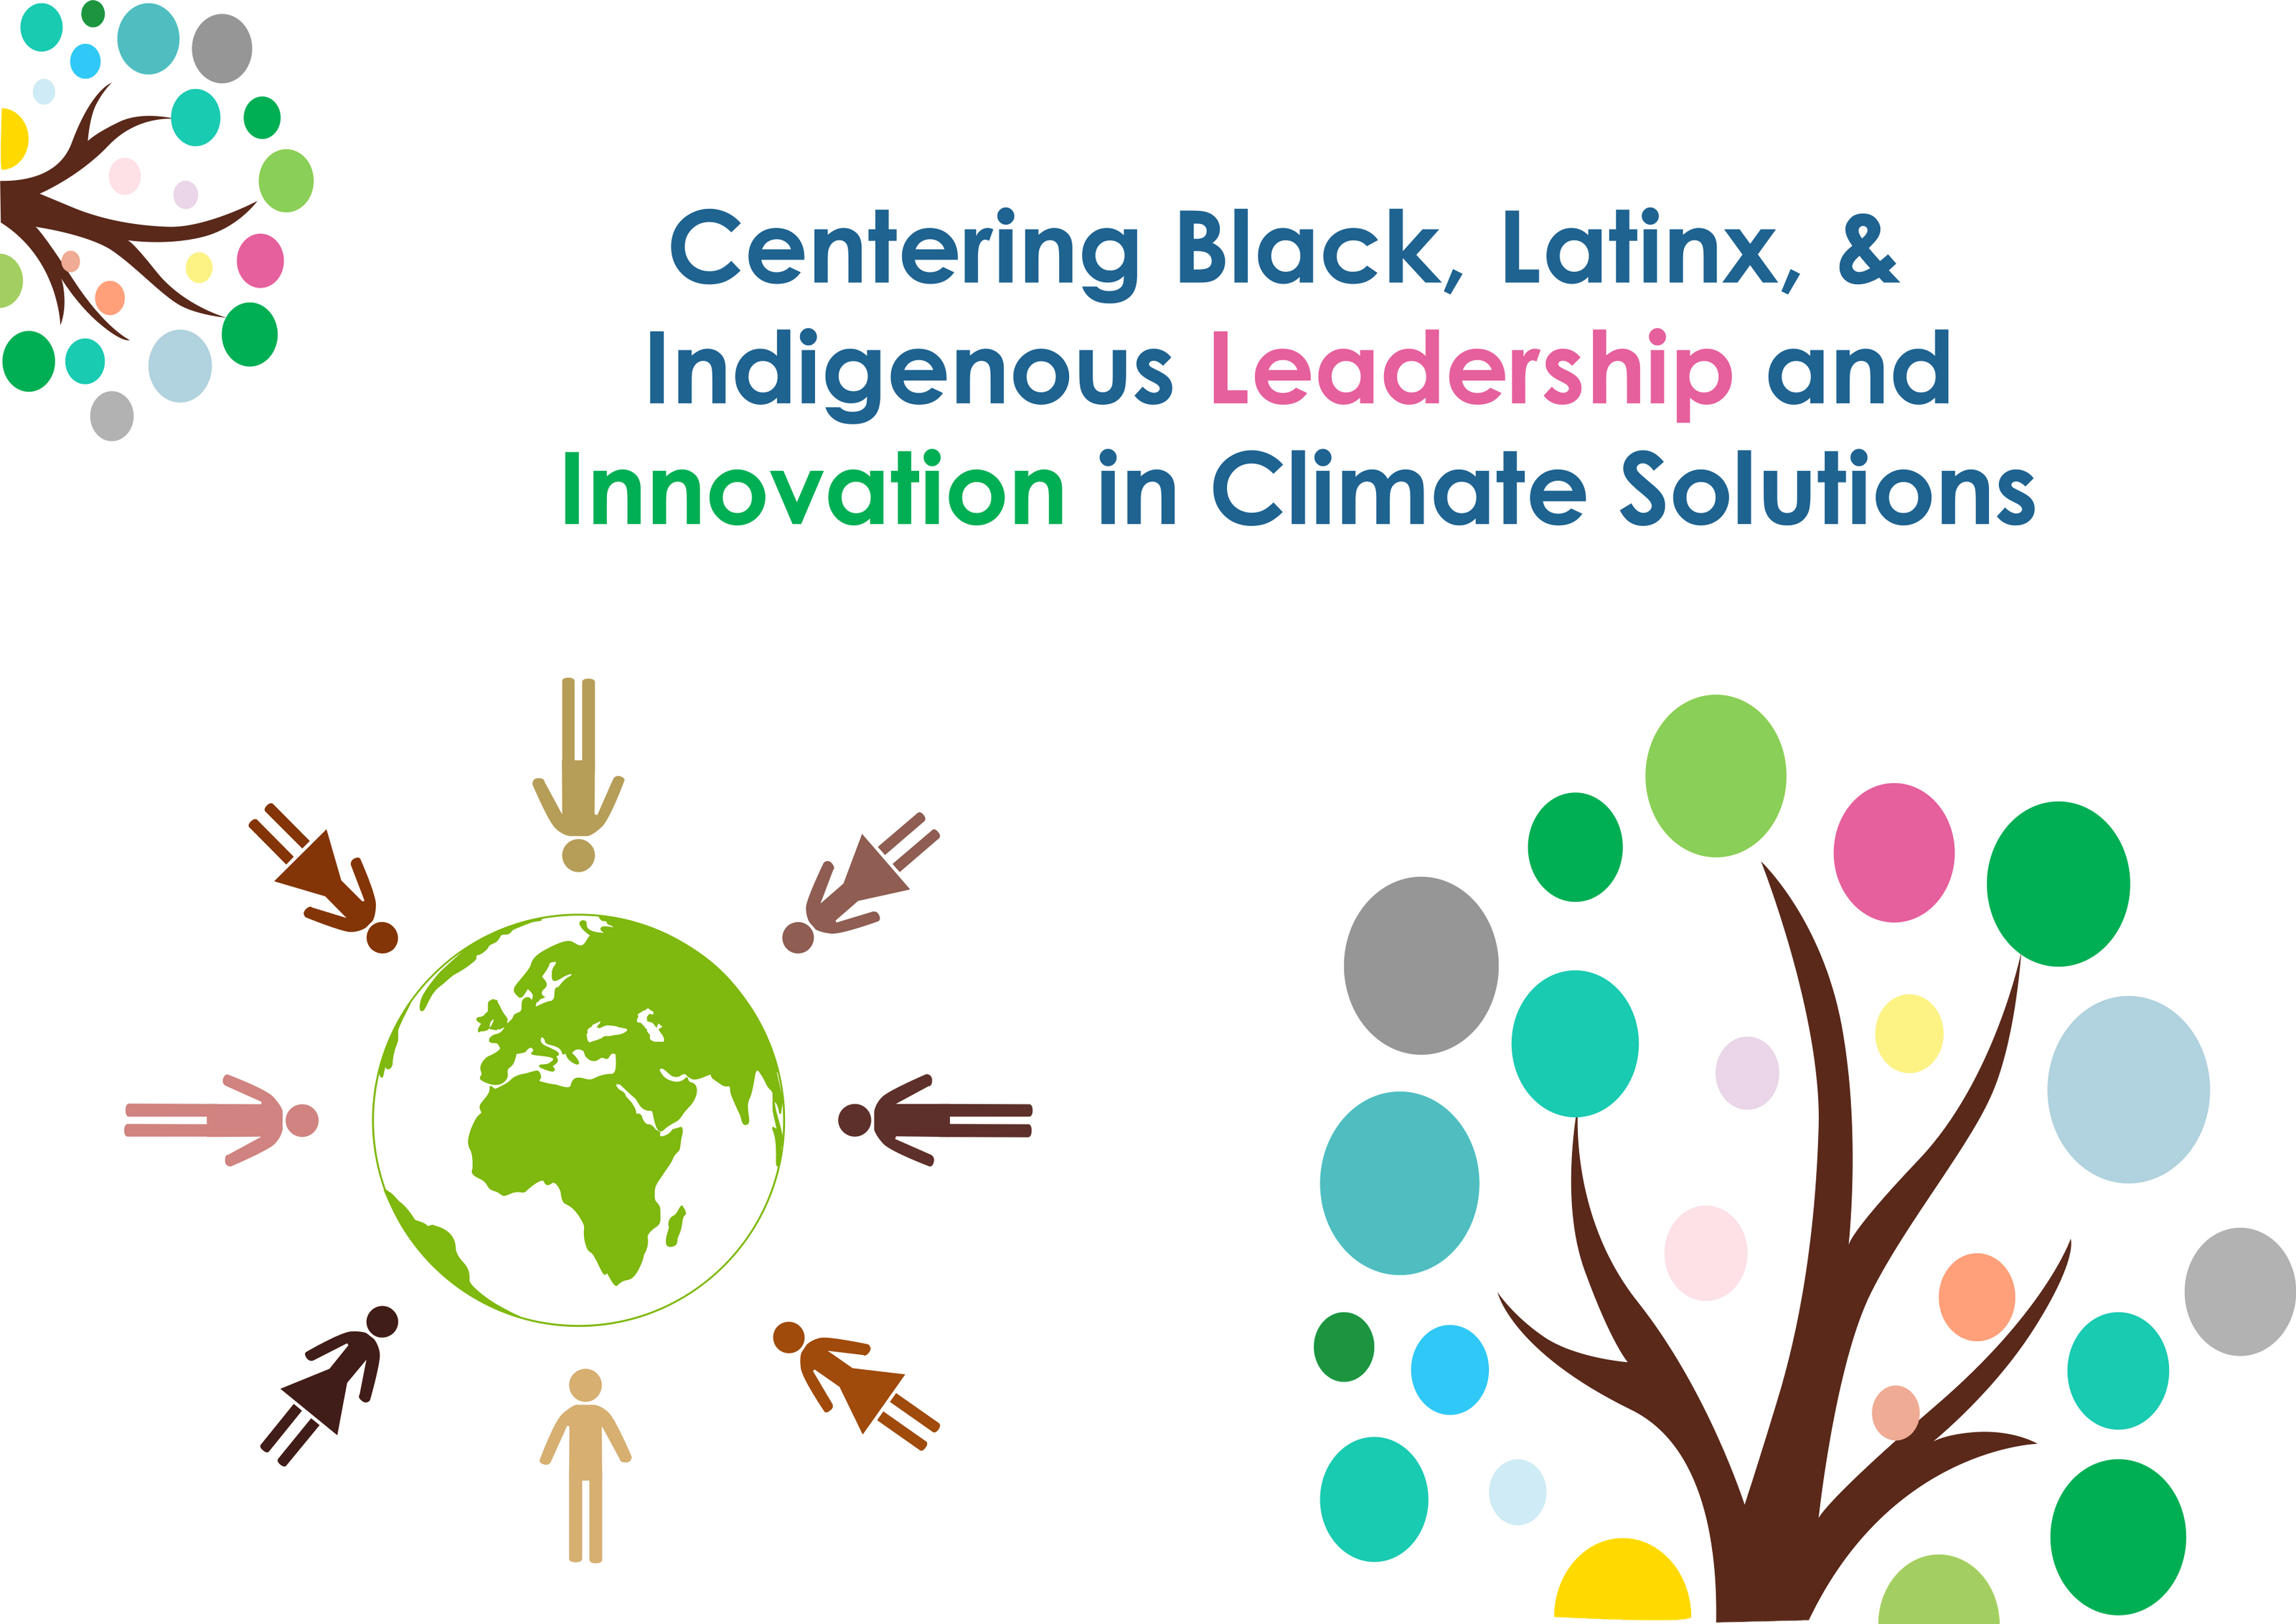 Just Solutions article by Cristina Munoz De La Torre featured image saying Centering Black, Latinx, and Indigenous Leadership and Innovation in Climate Solutions